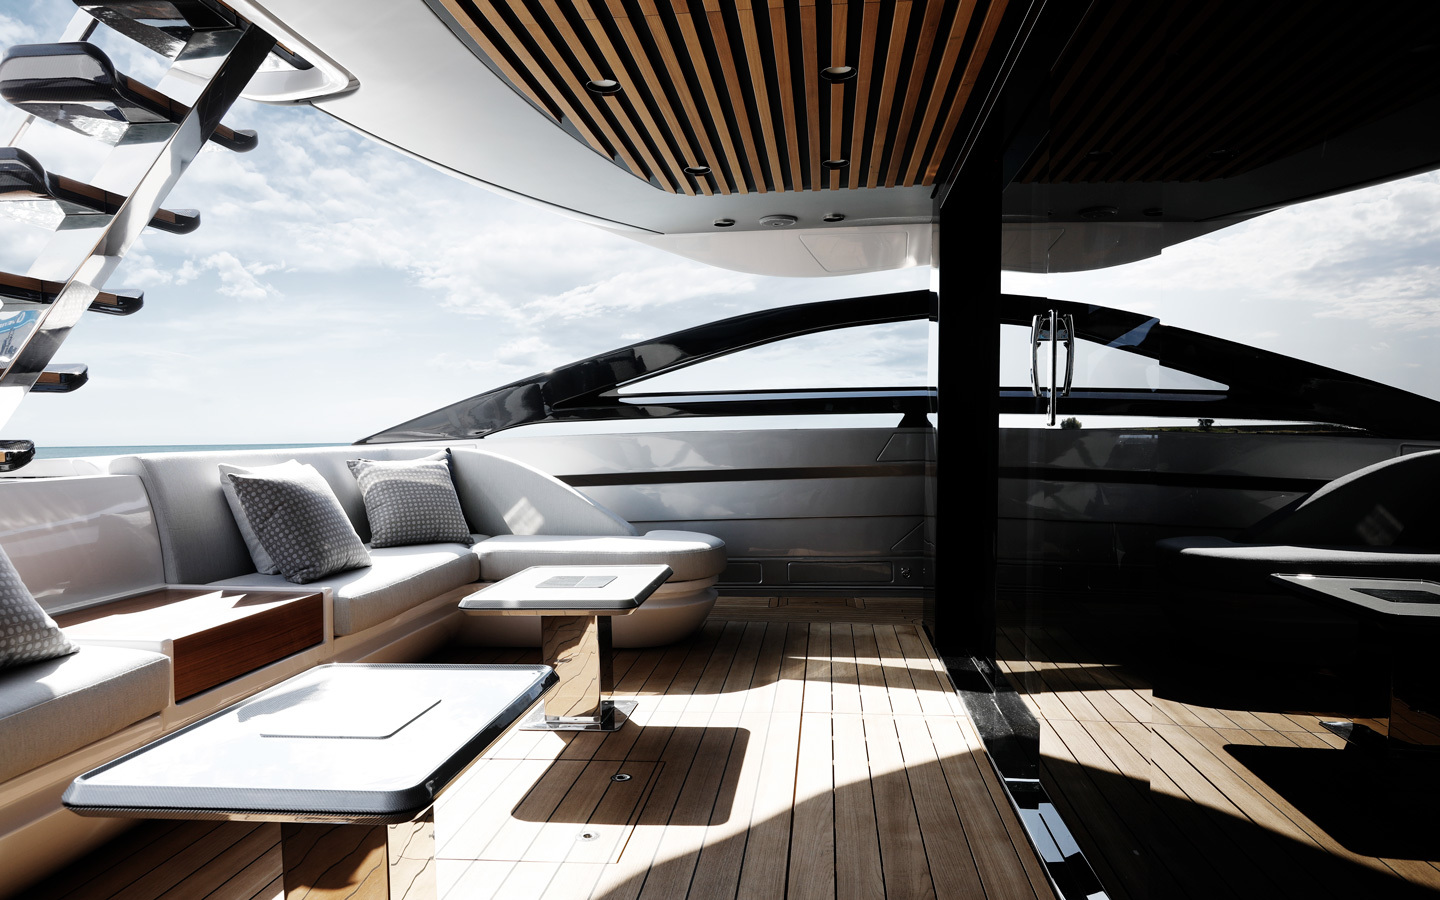 How to specify the ONLY thing that matters in pursuit of your yachting dreams.